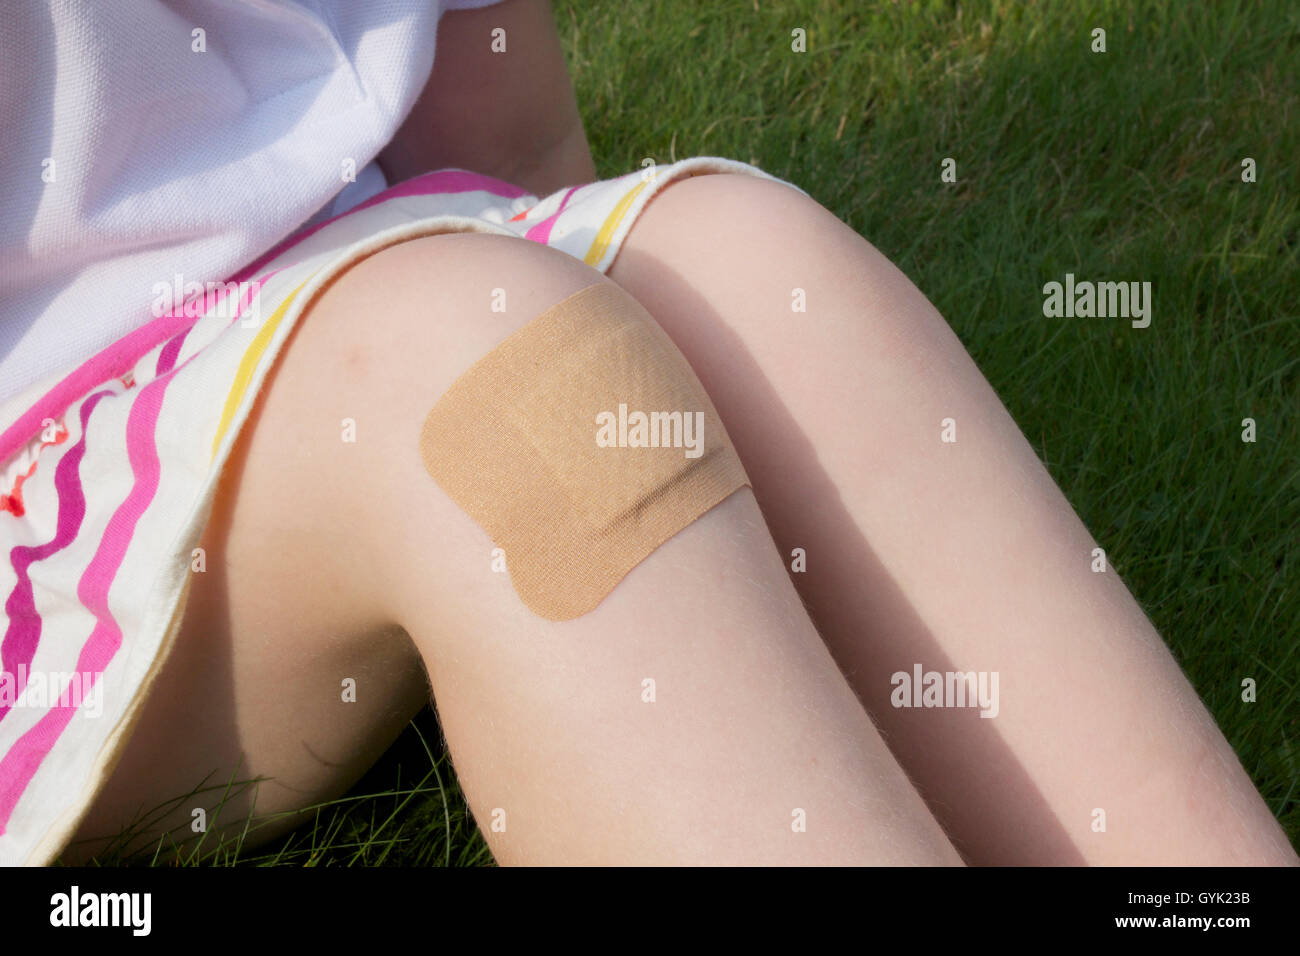 Injured Woman's Crotch With Plasters On White Background Stock Photo,  Picture and Royalty Free Image. Image 101262784.